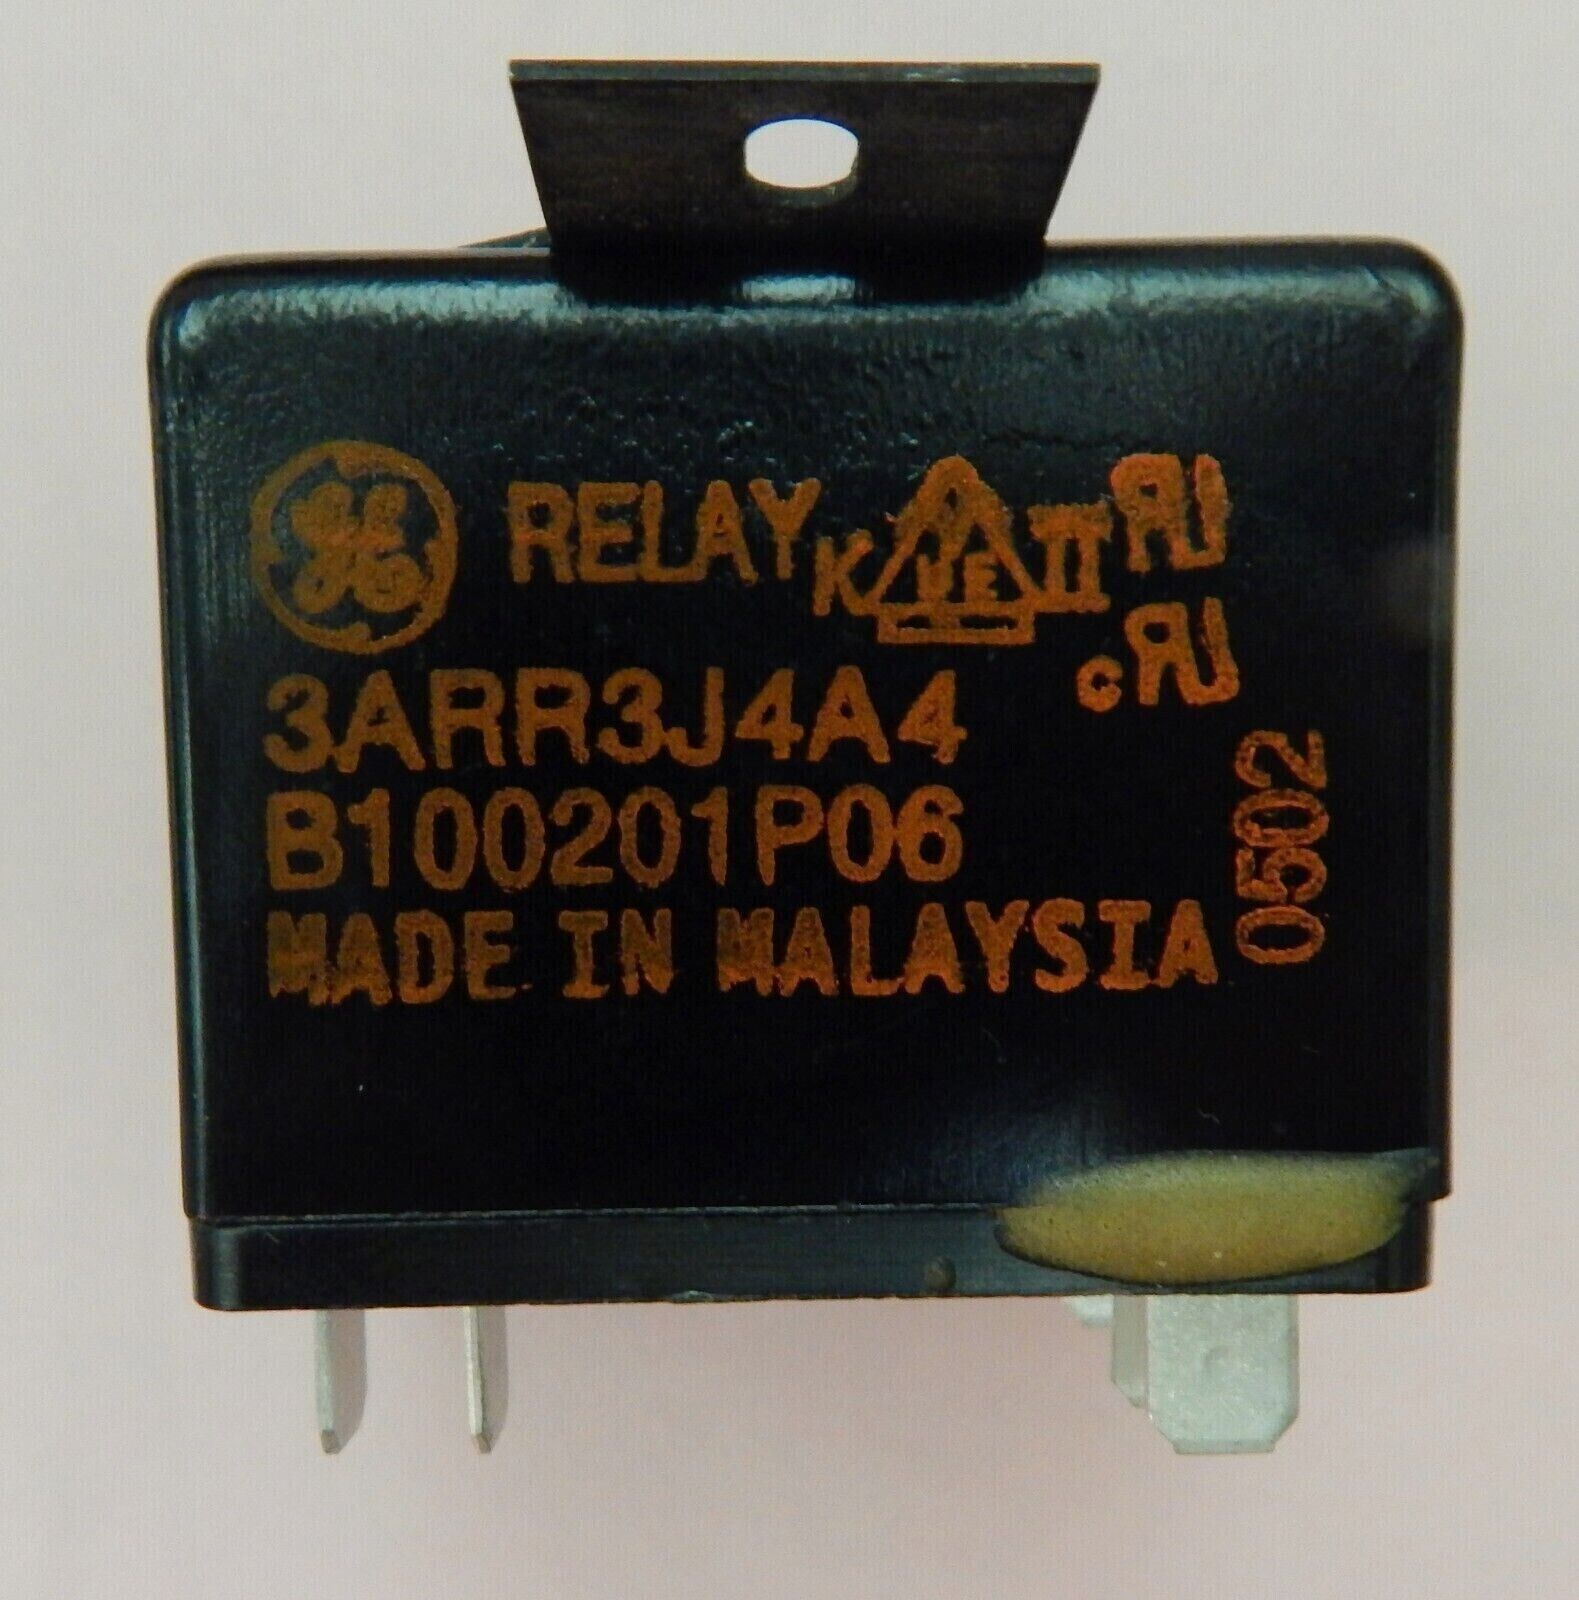 GE Relay 3ARR3J4A4 New old stock, long ago discontinued part. LAST ONE AVAILABLE